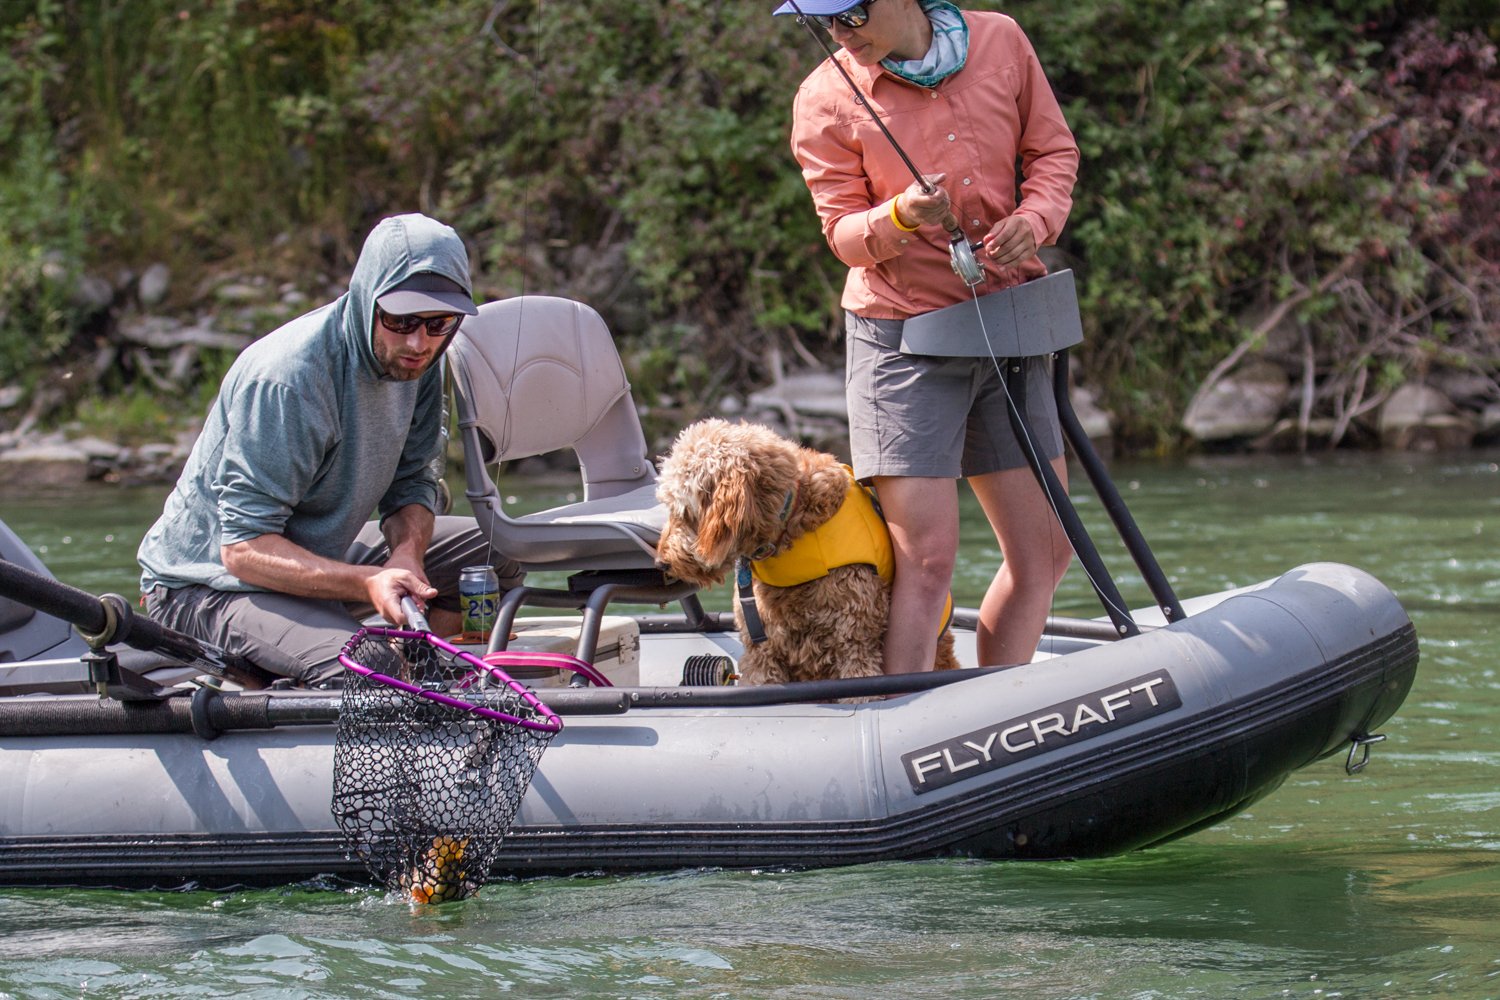 Flycraft's Inflatable Fishing Boat: Guide Base Package (3-Man) - FLYCRAFT  USA